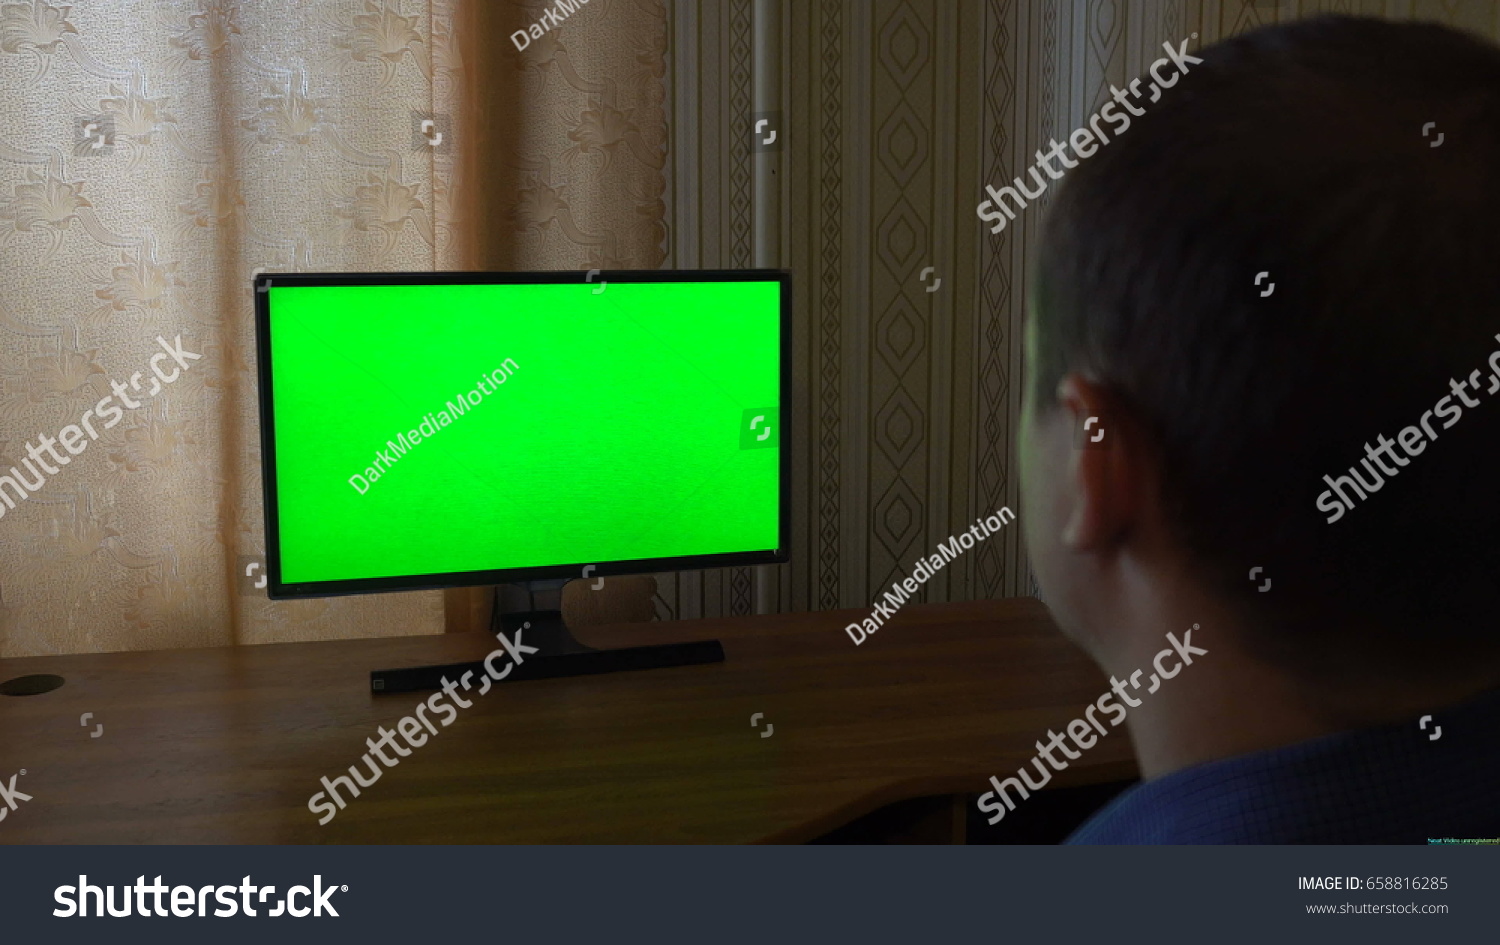 Male Hand With TV Remote Switching Channels On A Green Screen TV Point Of View. #658816285